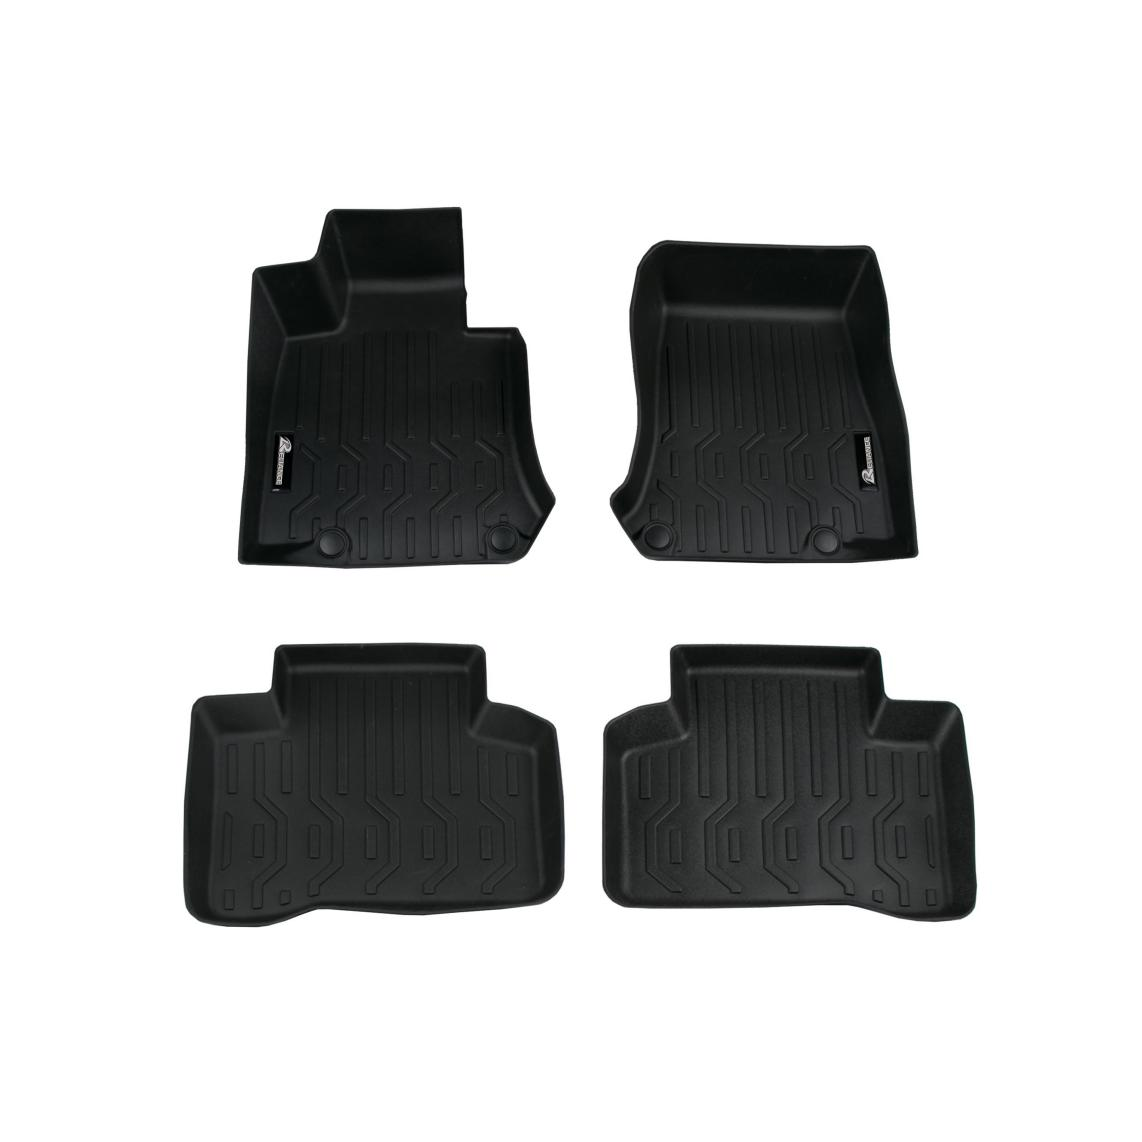 Custom Fit for Floor Mats Hyundai Accent All Weather Floor Liners 1st and 2nd Row Carpet Protection Mat Set Featured Image